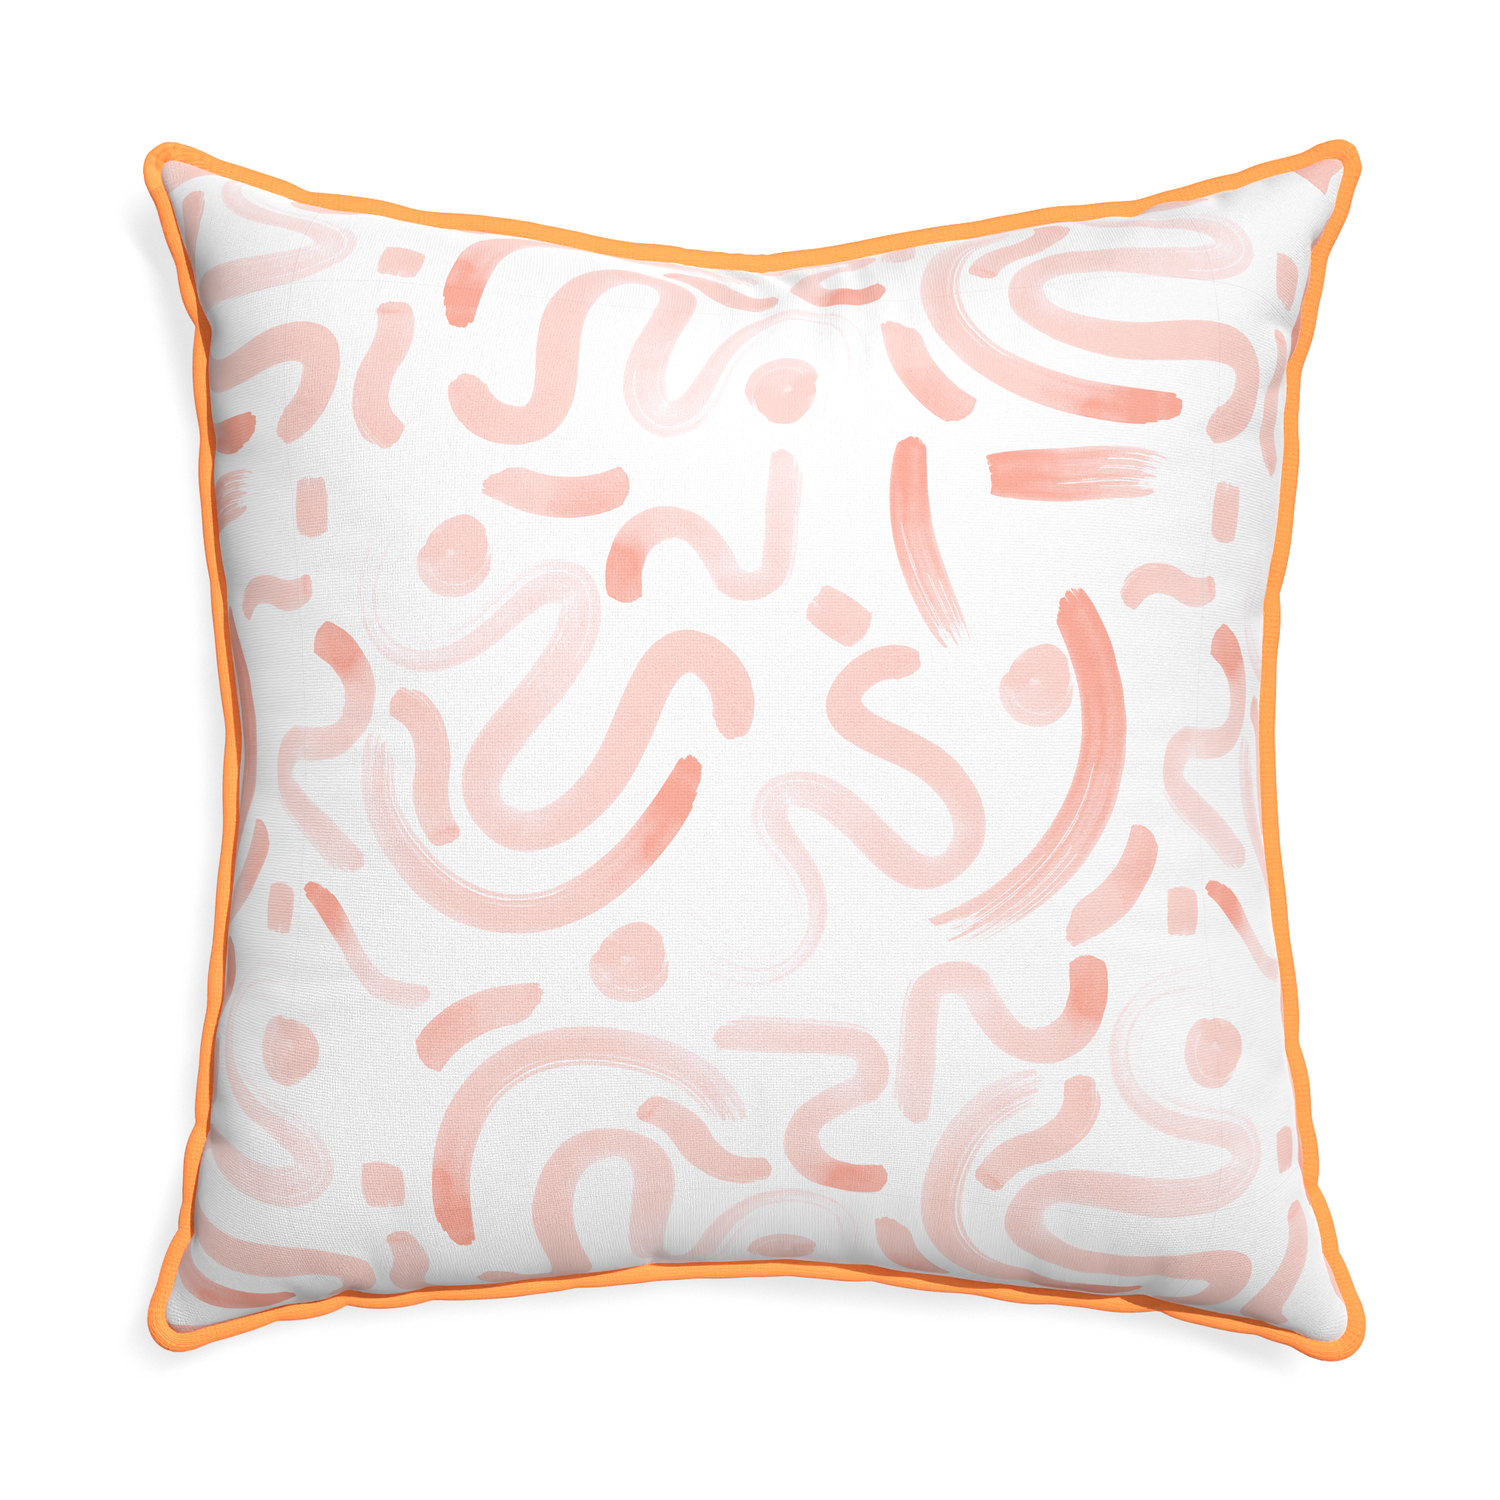 Euro-sham hockney pink custom pillow with clementine piping on white background